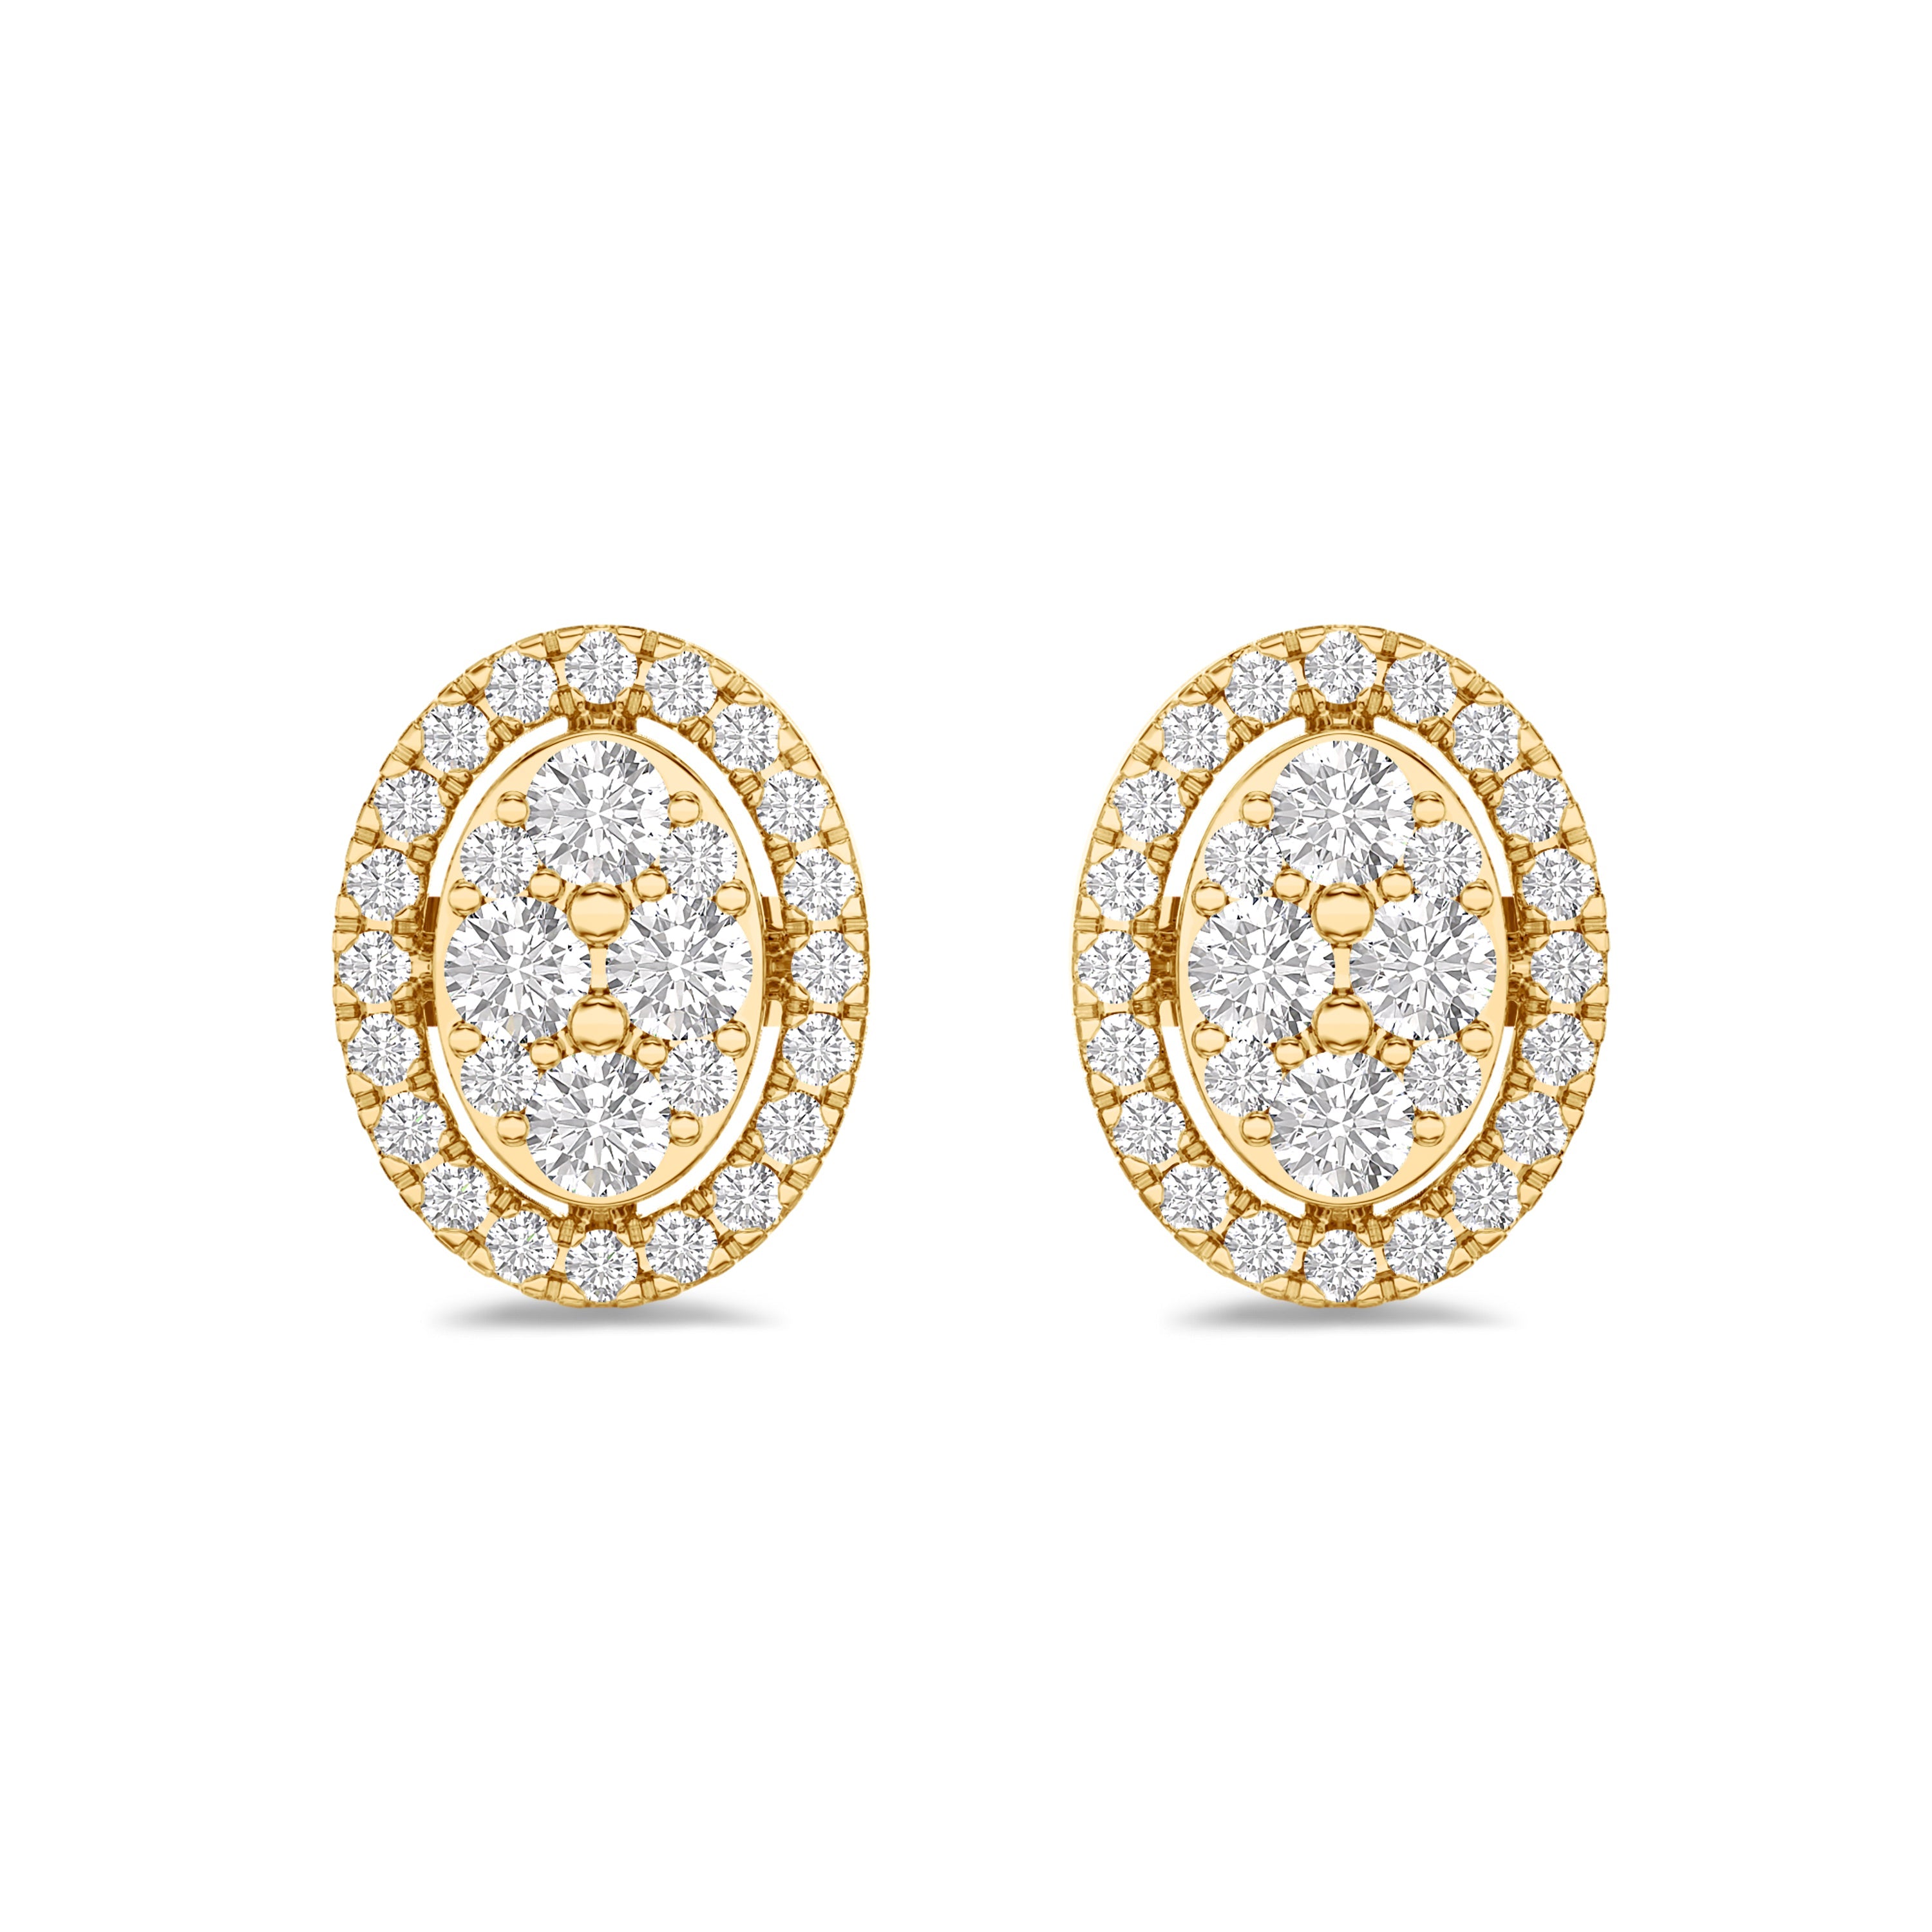 cluster diamond earrings in 18K yellow gold, 0.31 carat, FG color and VS-SI clarity